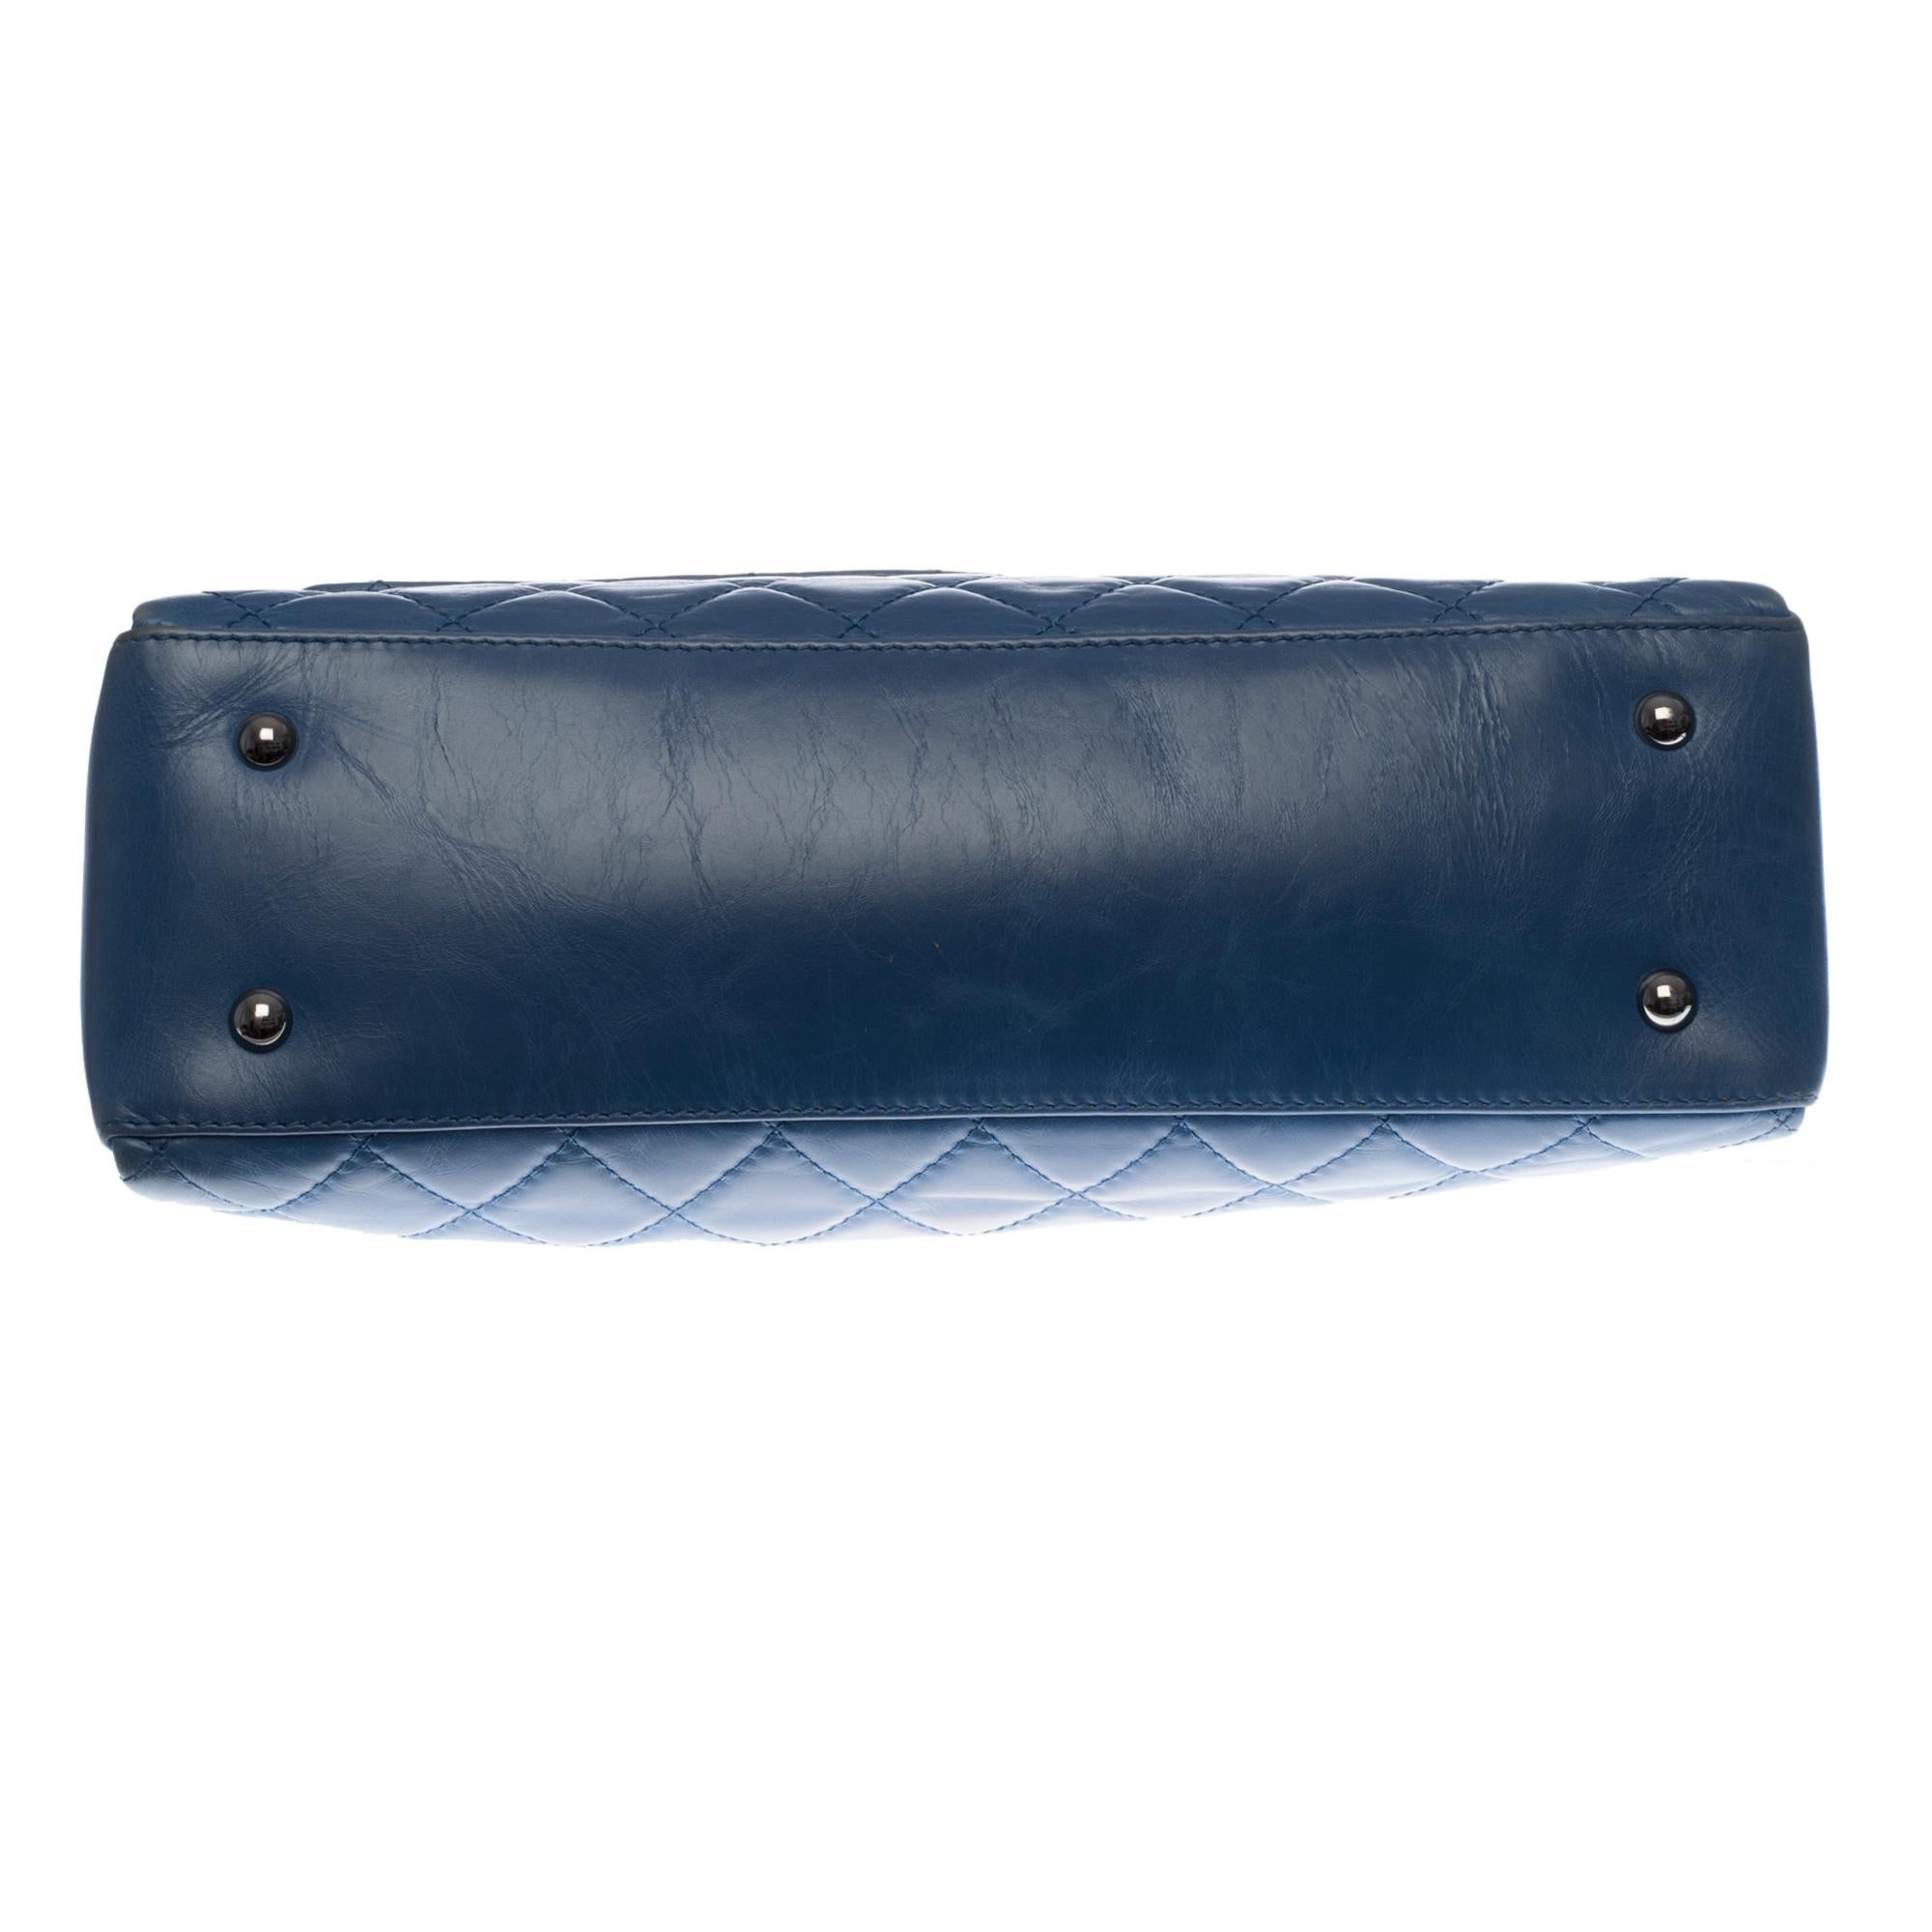 Chanel Classic Maxi Flap shoulder bag in blue quilted lambskin, SHW For Sale 5